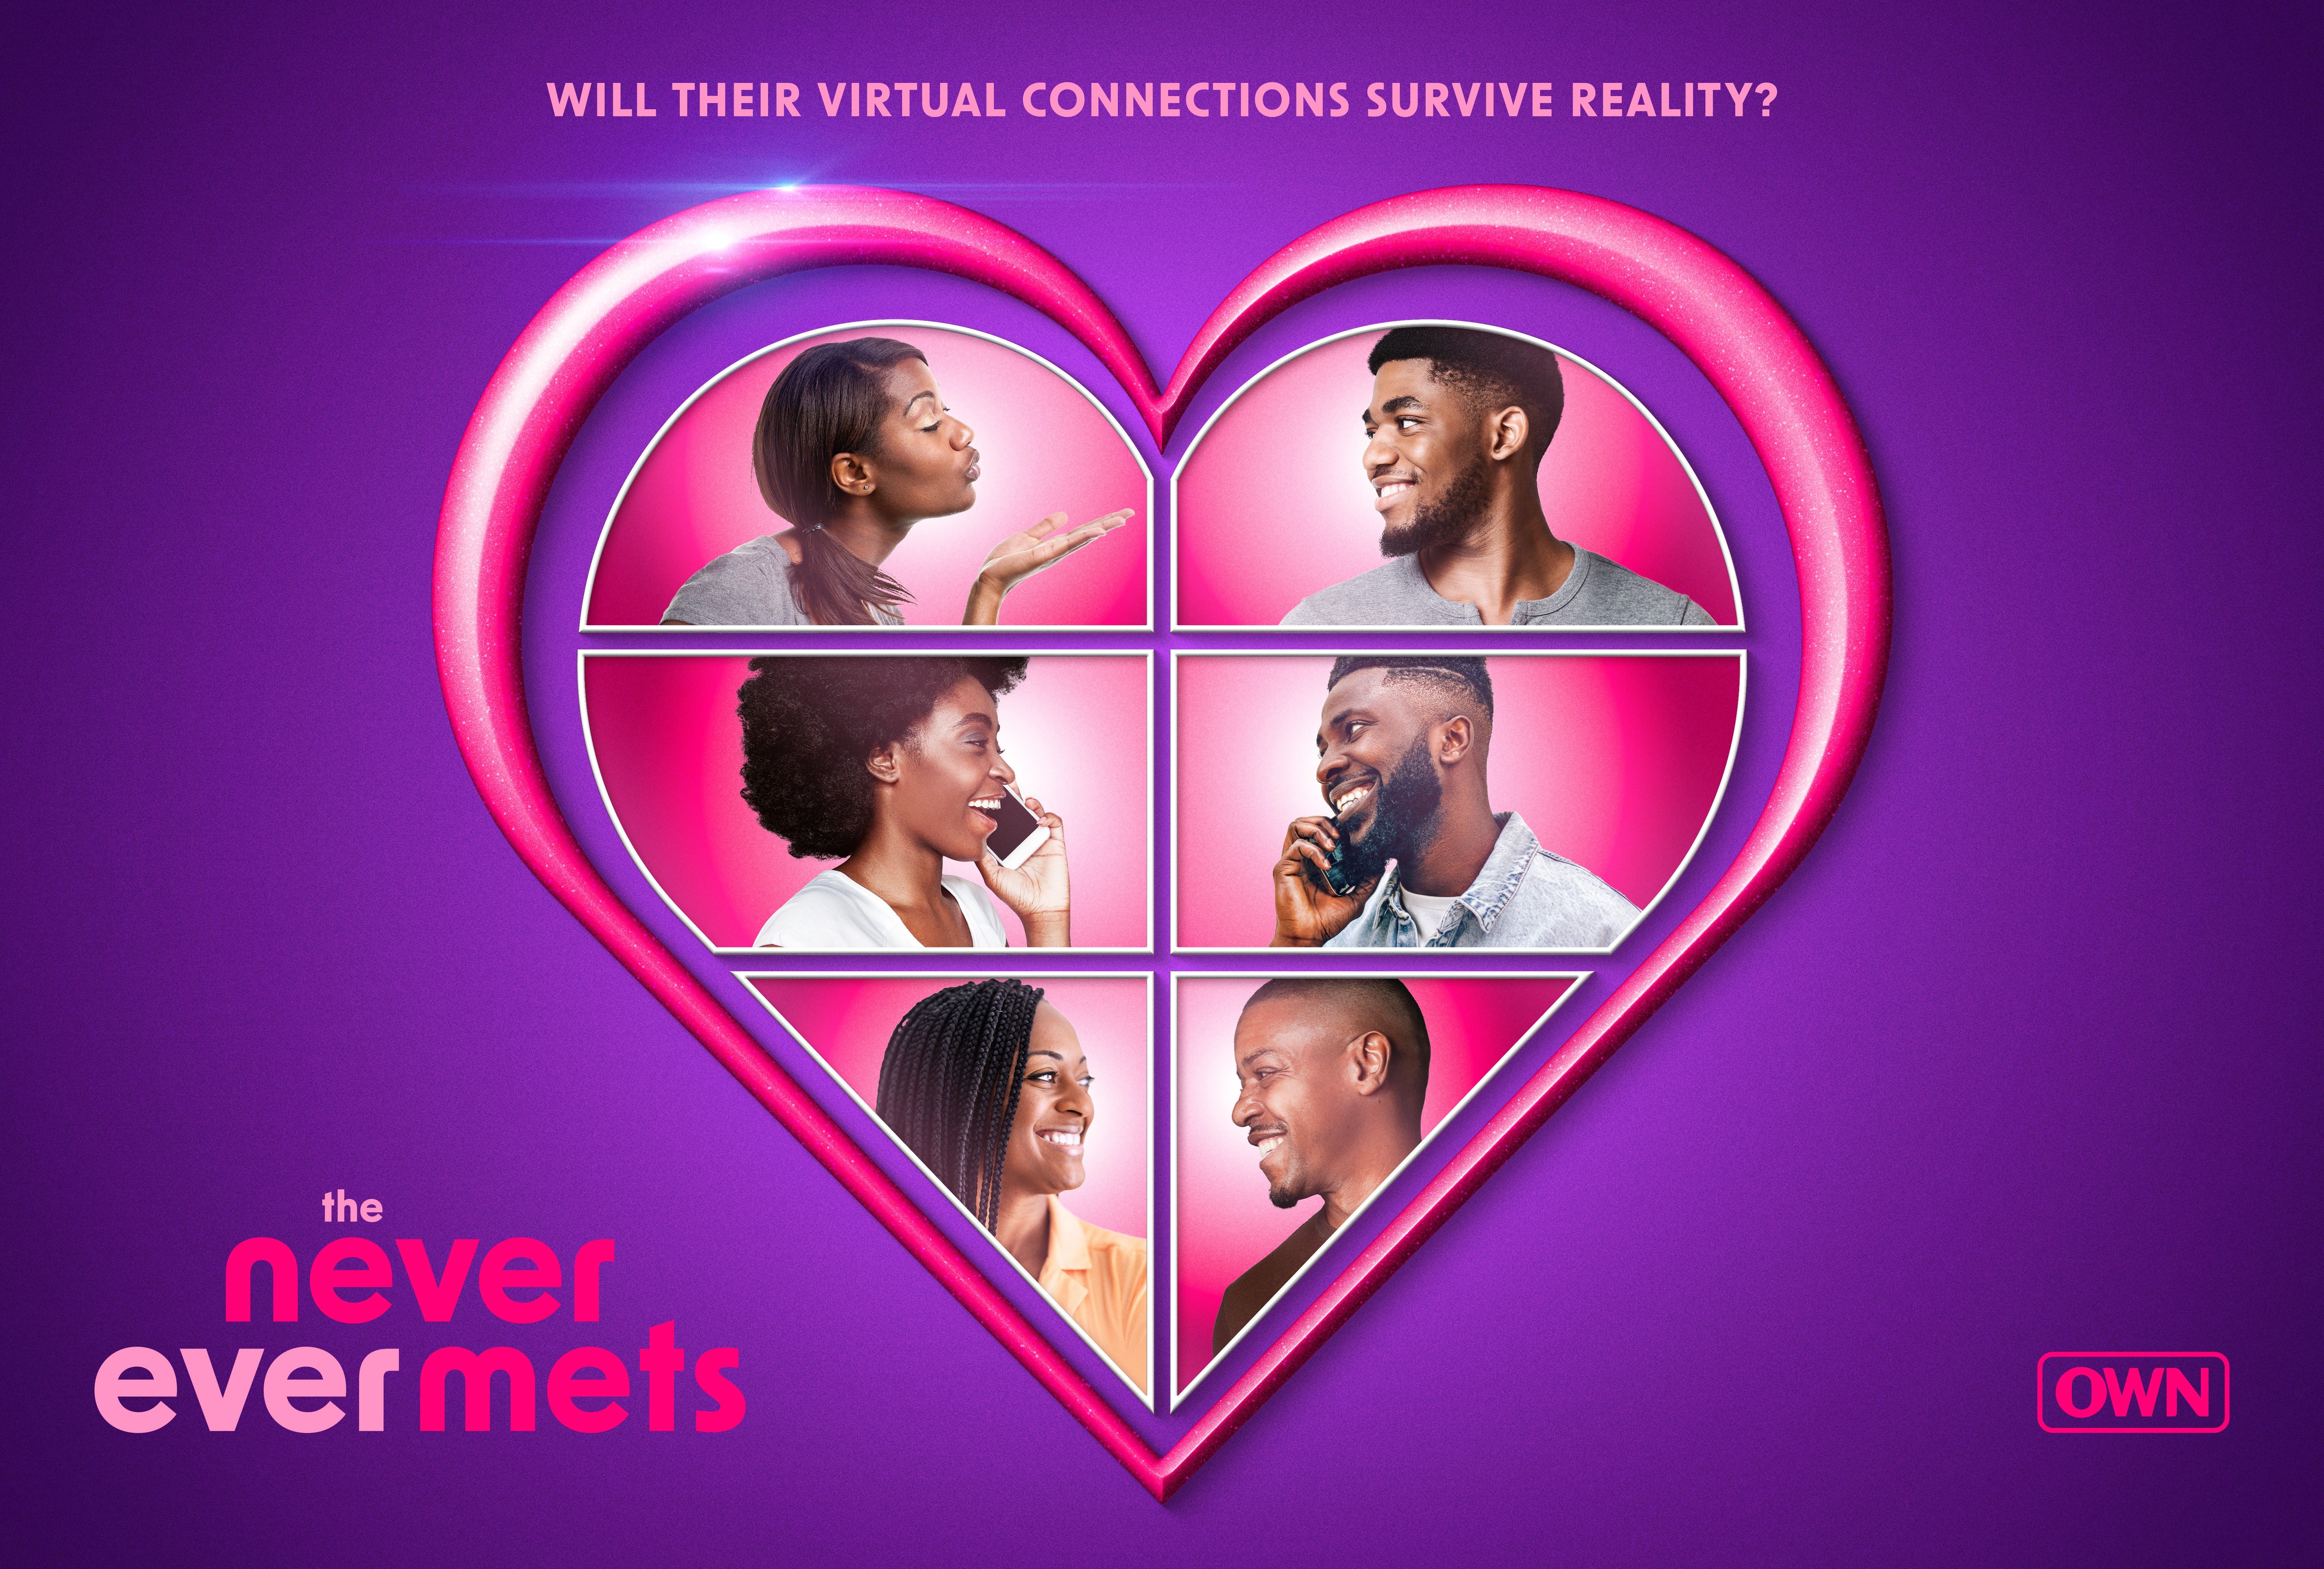 OWN’s ‘The Never Ever Mets’ Exclusive Clip: The Couples Connect During A Kama Sutra Exercise